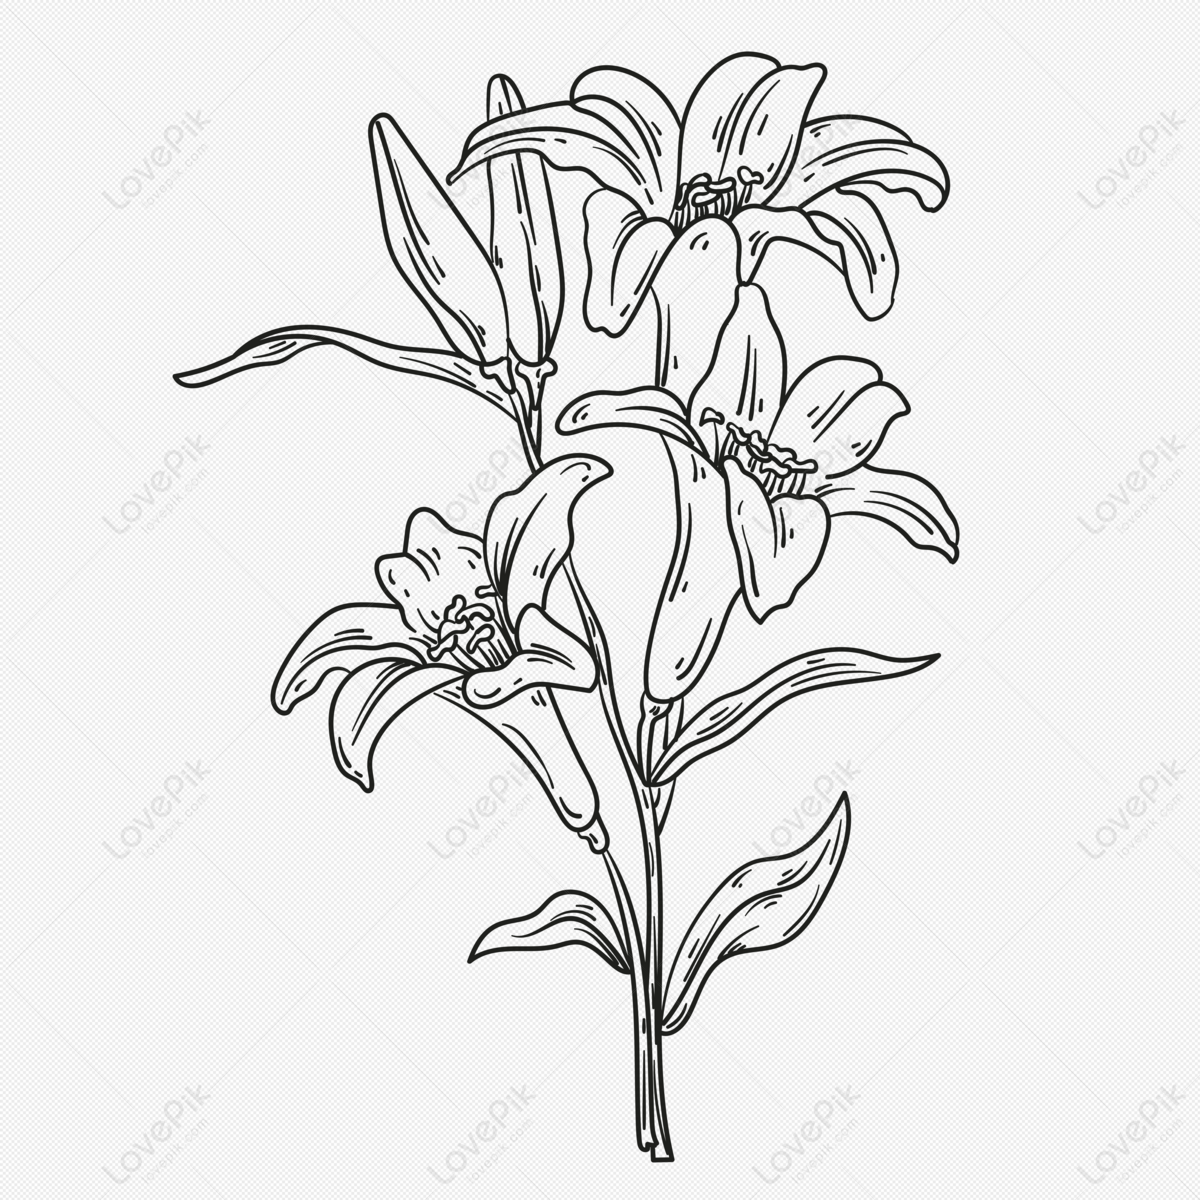 Lily flower drawing step by line arts Royalty Free Vector